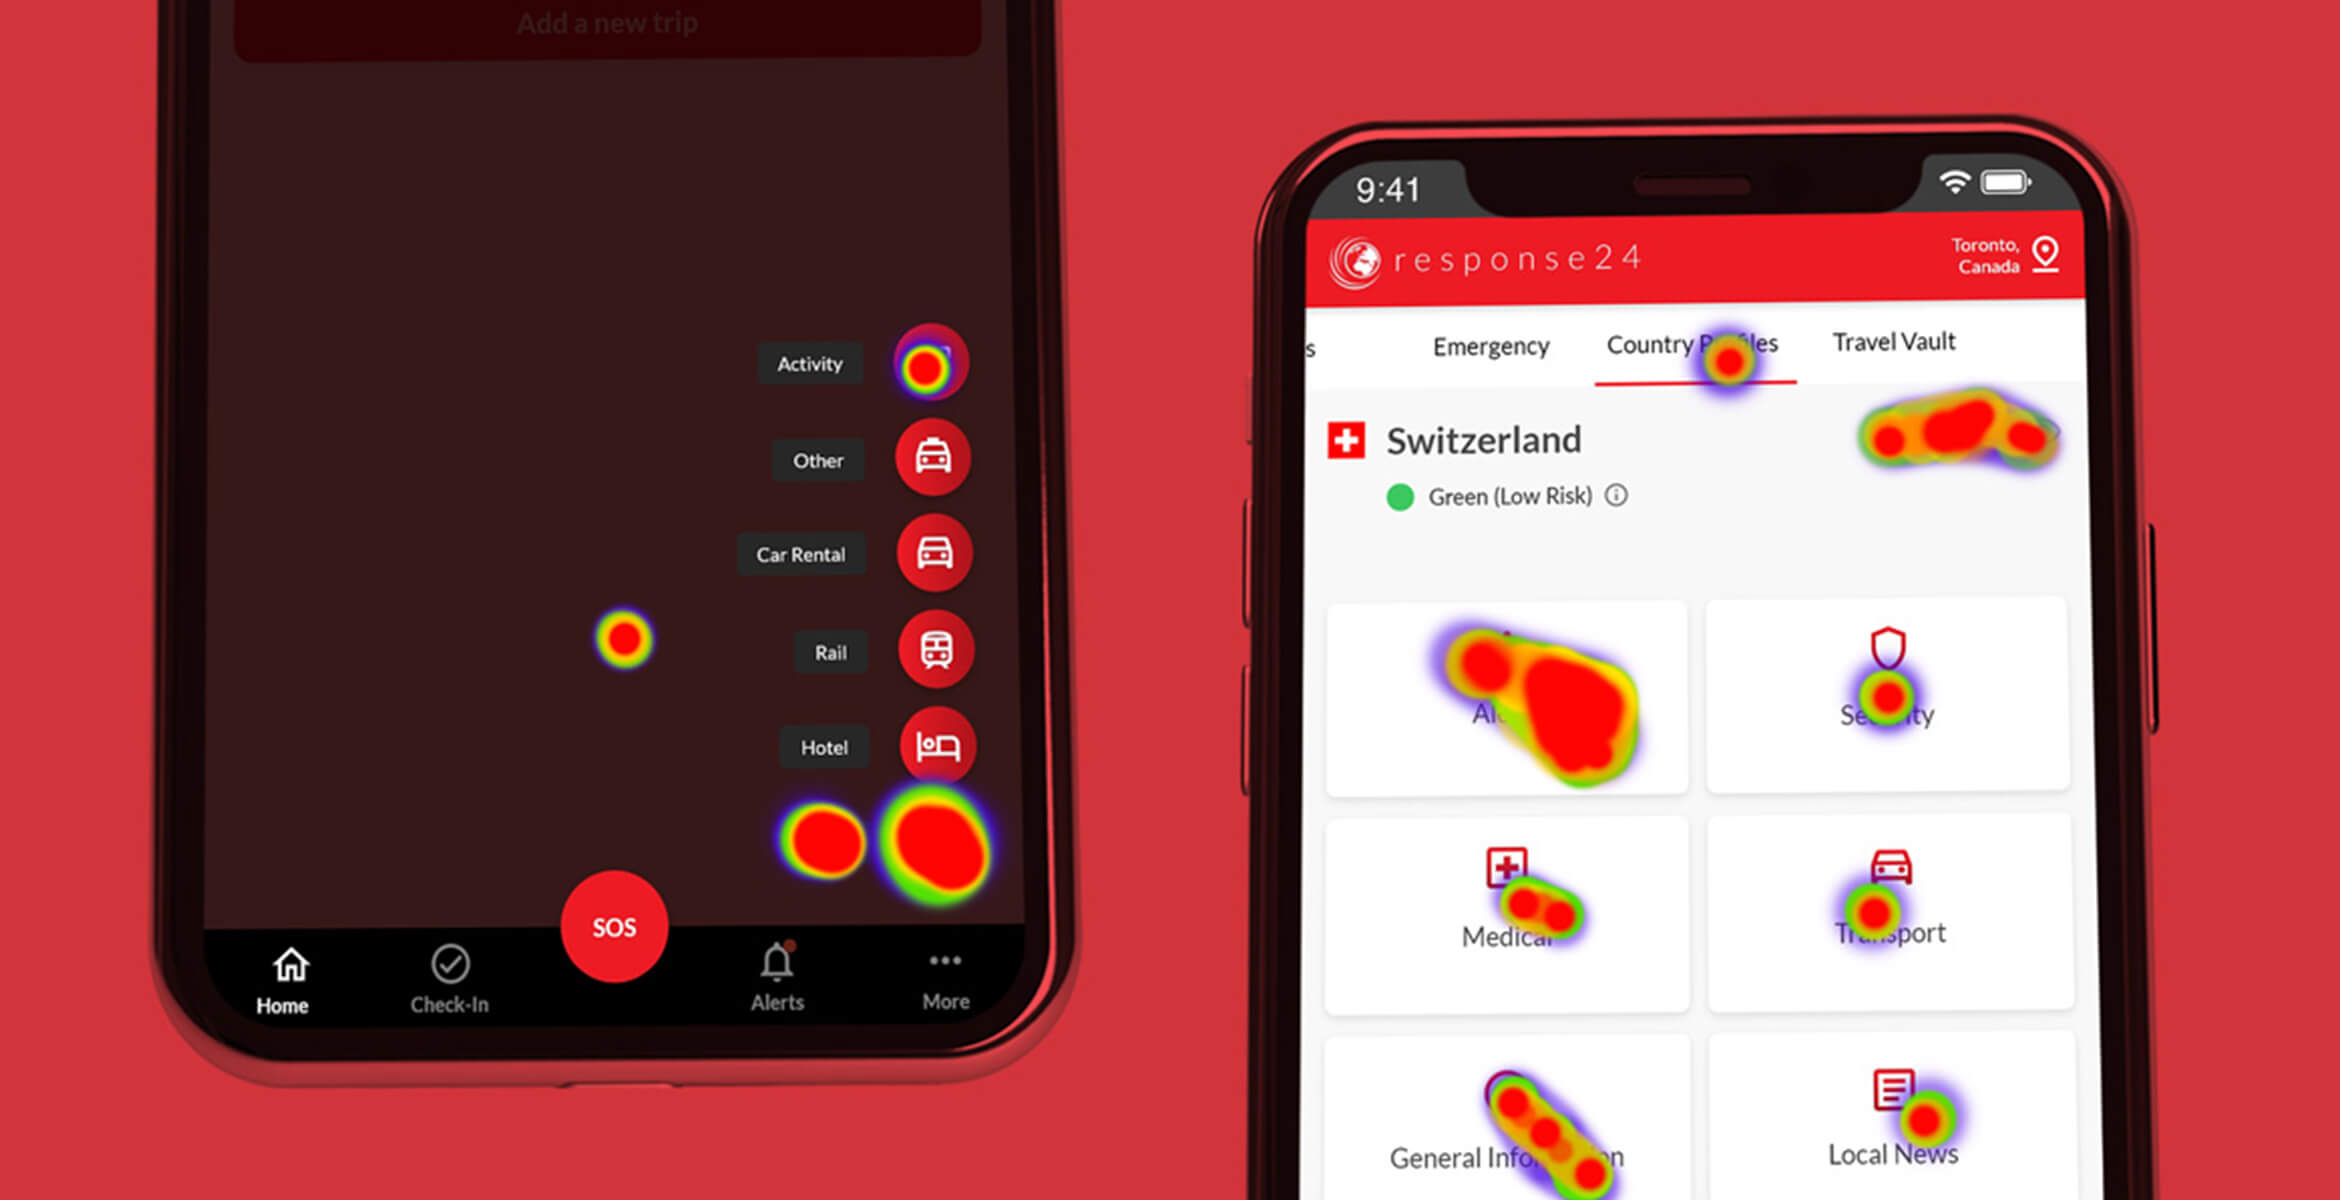 Response 24 app shown on two phones interacting with buttons heat map on the mobile UI